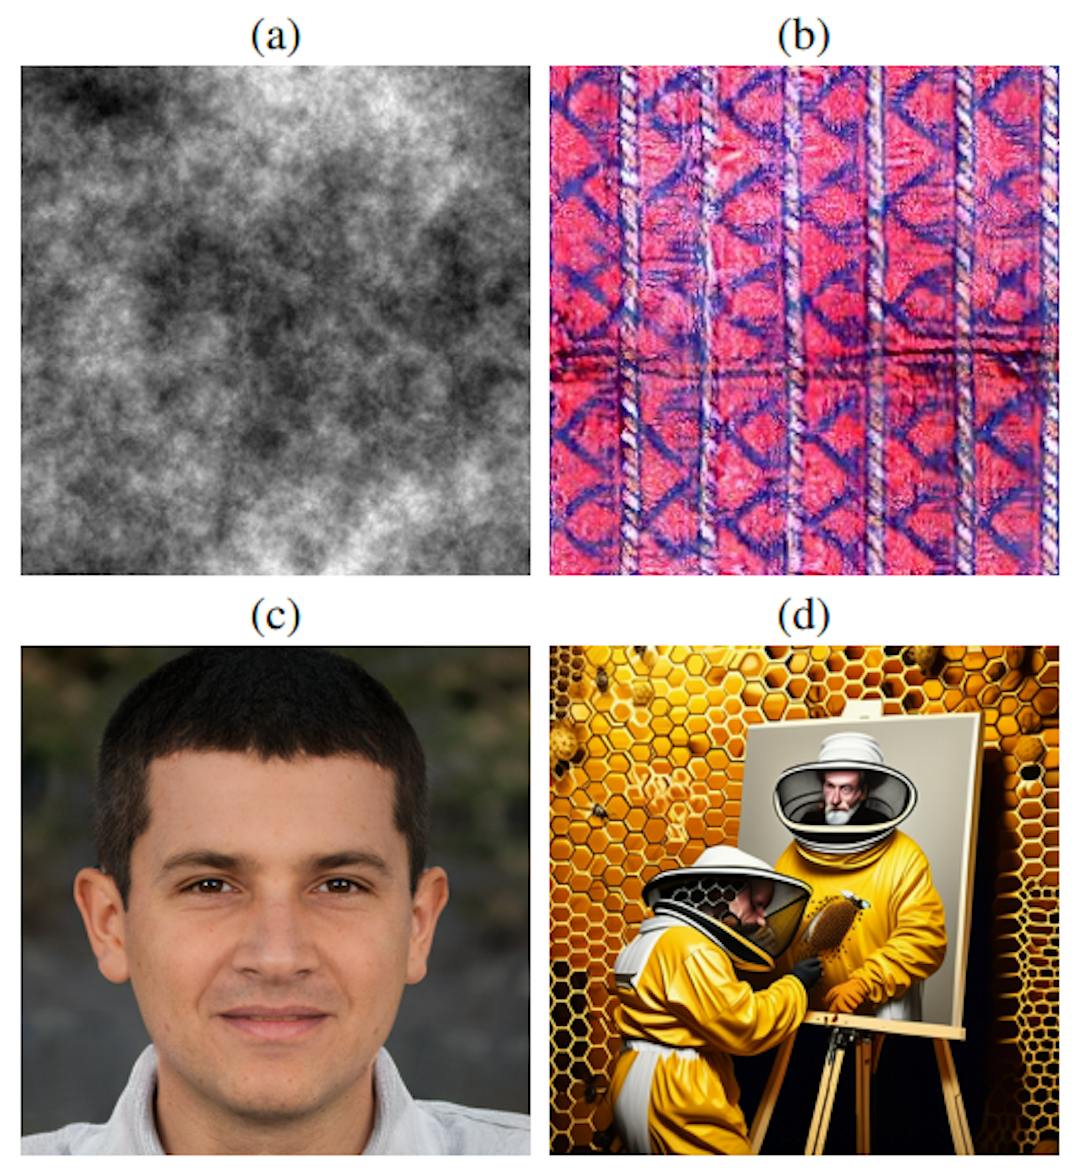 Figure 1. The evolution of statistical models of natural images: (a) a fractal pattern with a 1/ω power spectrum; (b) a synthesized textile pattern [25]; (c) a GAN-generated face [17]; and (d) a diffusion-generated scene with the prompt “a beekeeper painting a self portrait” [1].